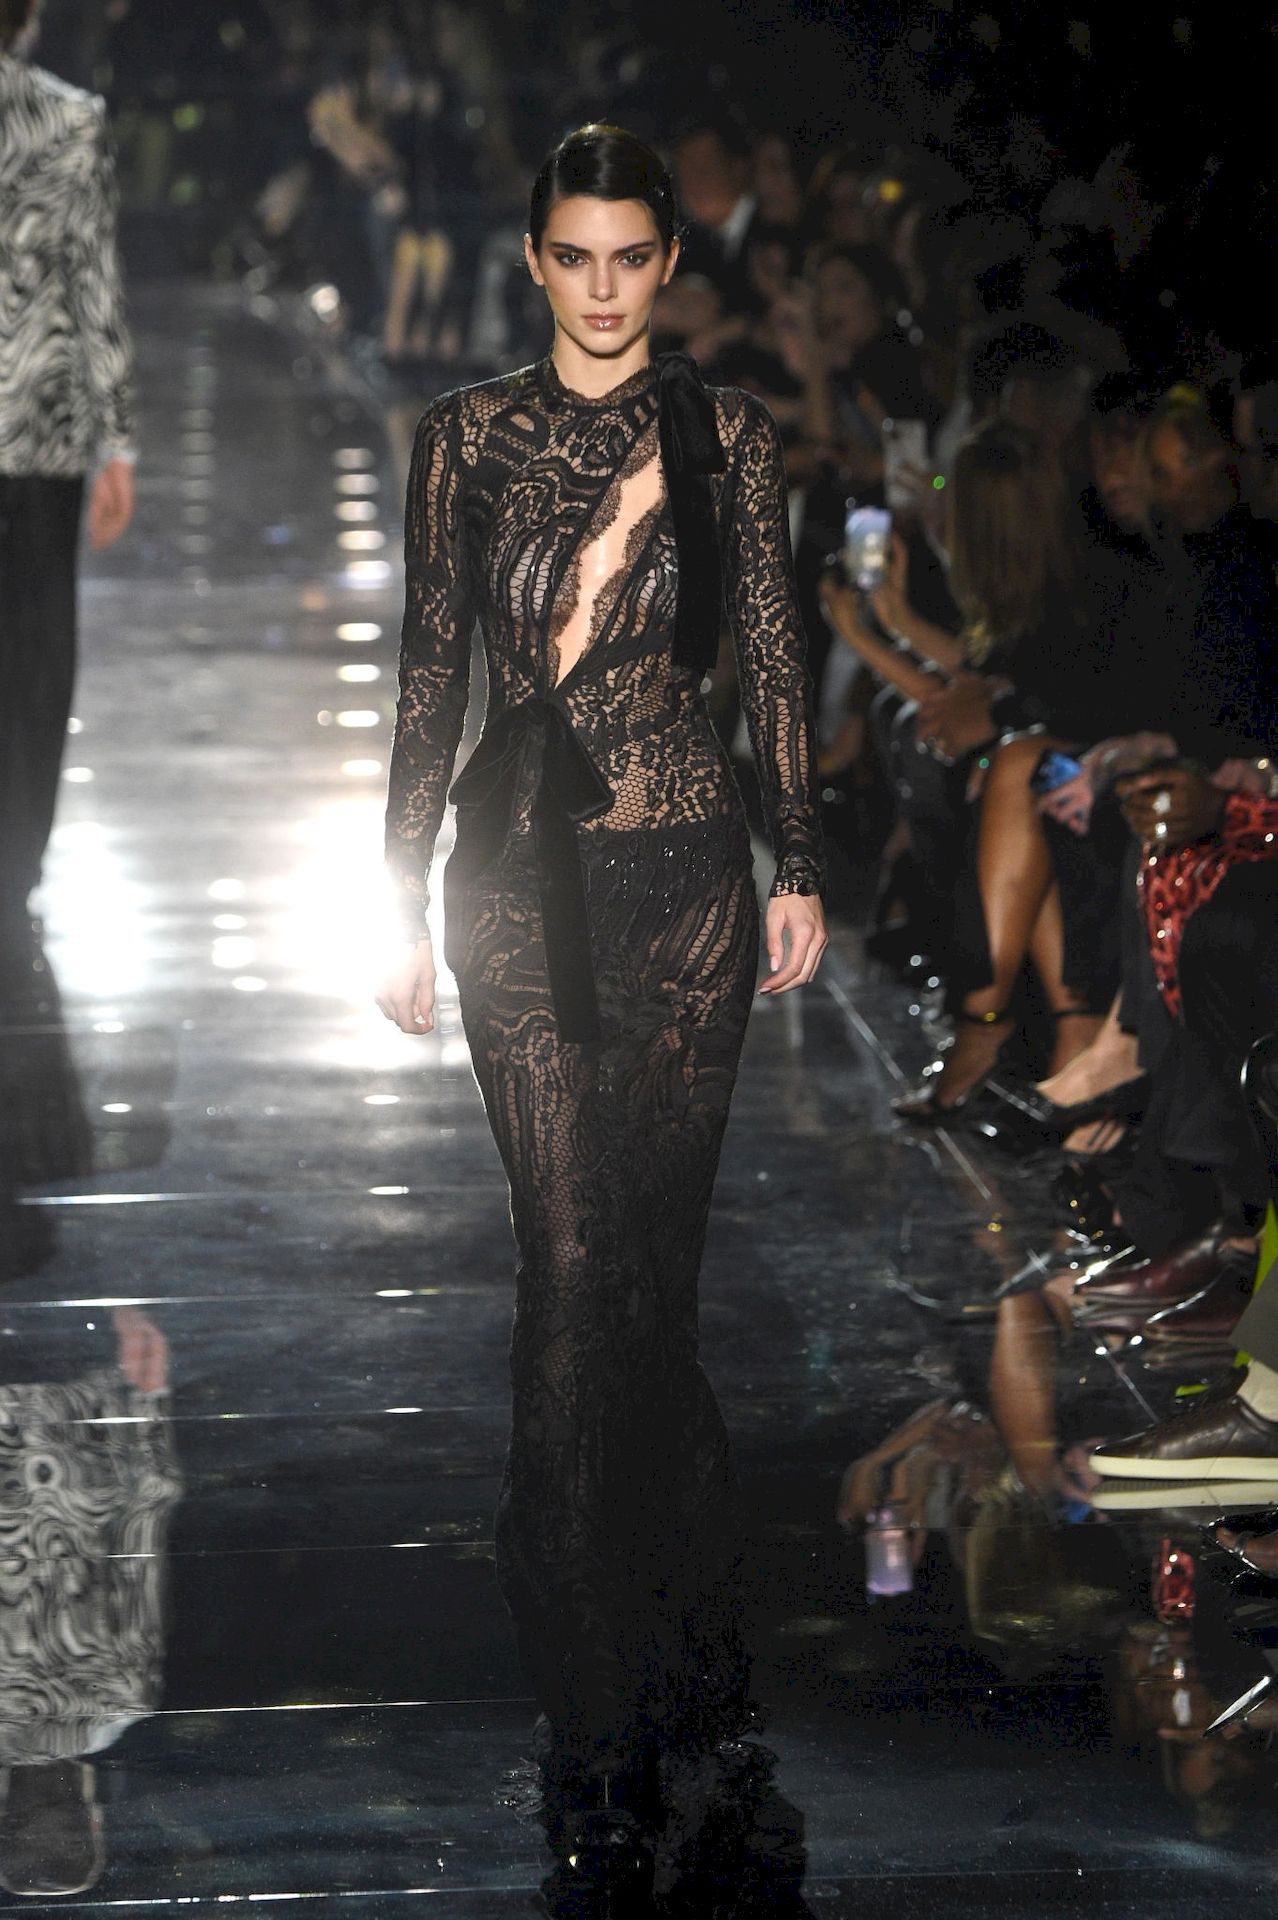 Kendall-Jenner-Walks-the-Runway-During-the-Tom-Ford-Show-0009.jpg